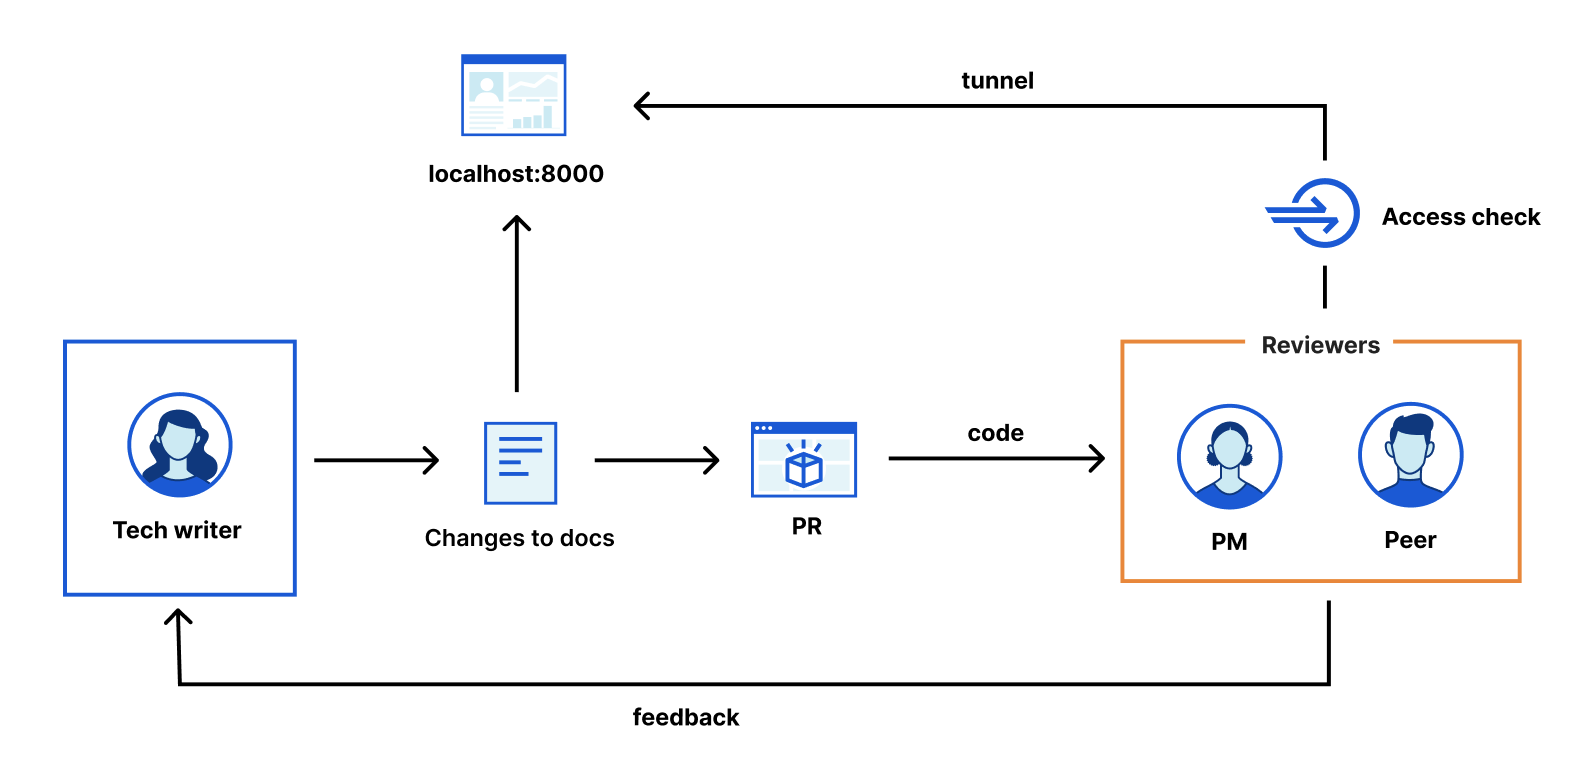 Chart showing the new workflow of the technical writing team using Cloudflare Tunnel and Access.